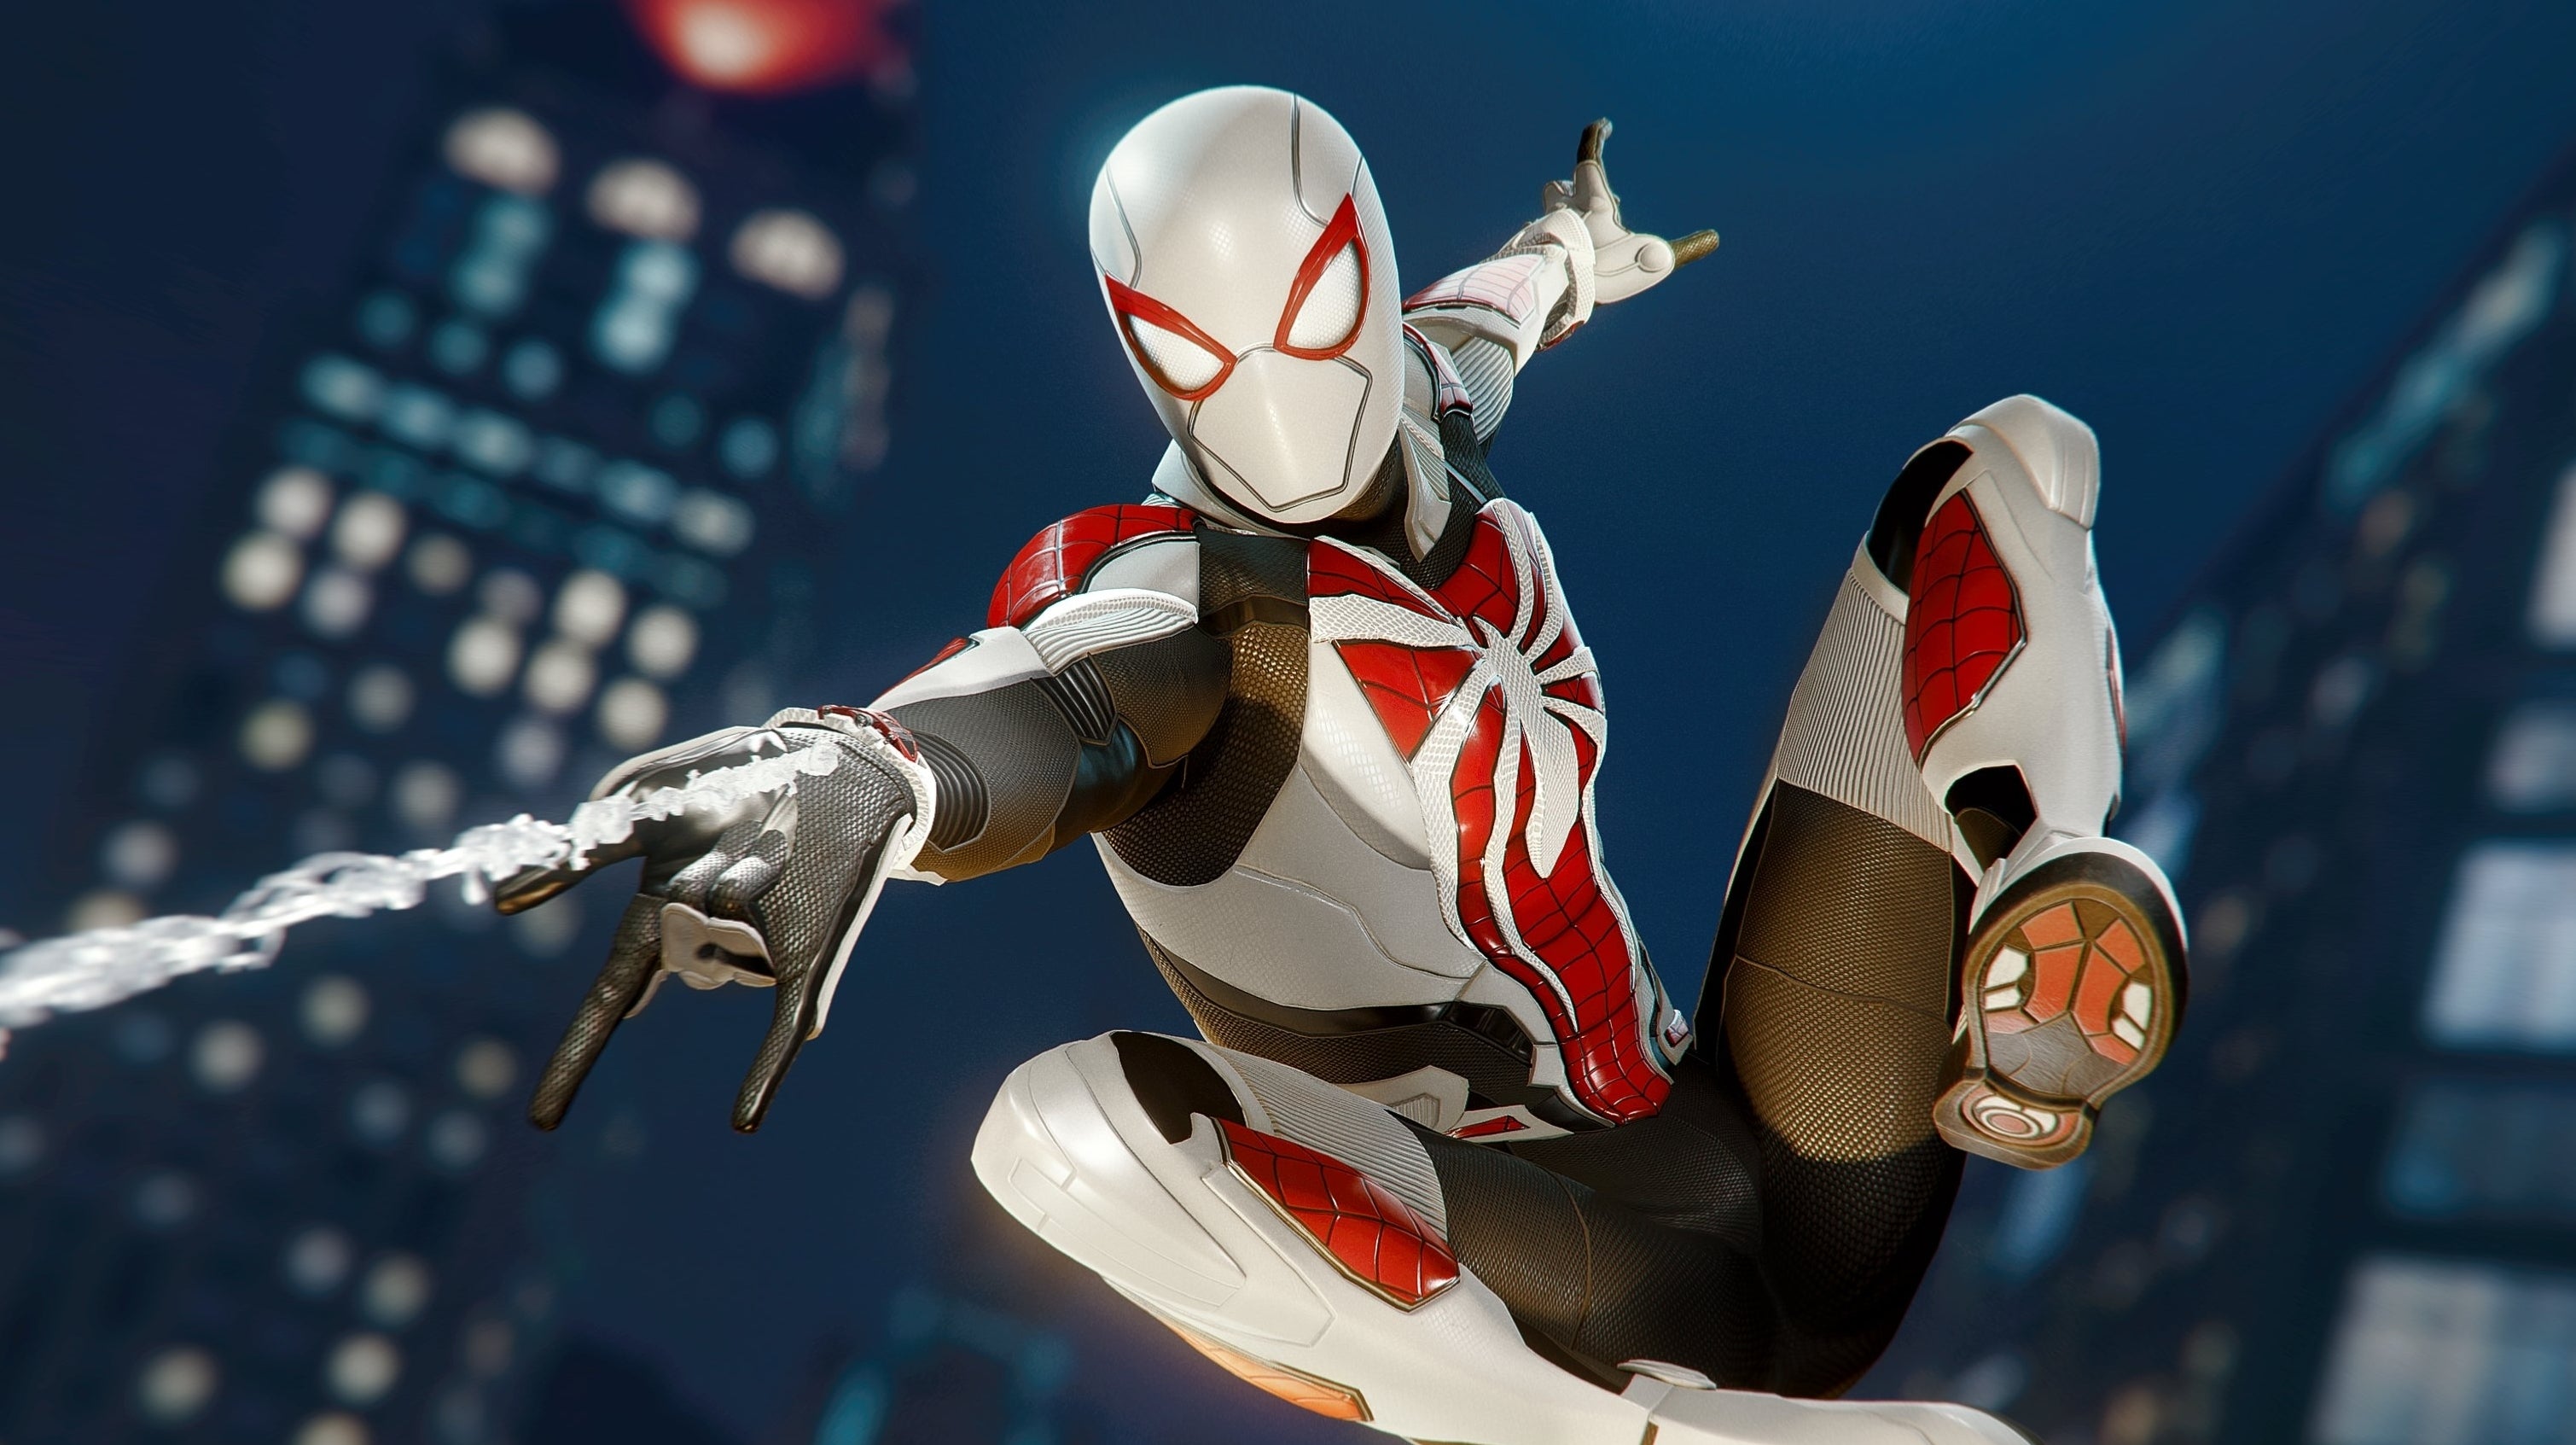 Image for You'll be able to transfer your existing Spider-Man saves to PS5's remaster after all